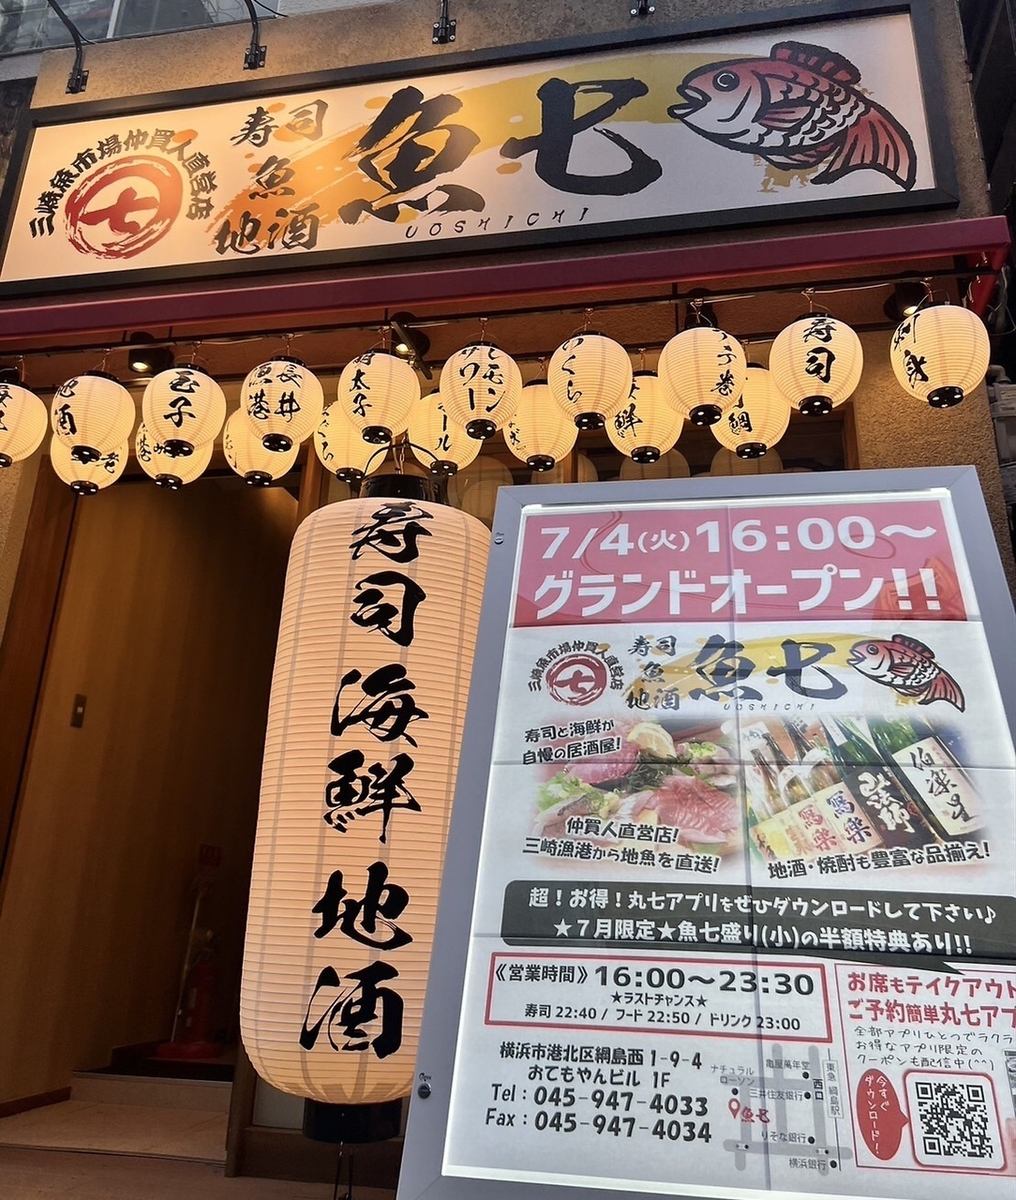 《Best cost performance near the station!》Enjoy fresh fish and local vegetables delivered directly from the production area♪